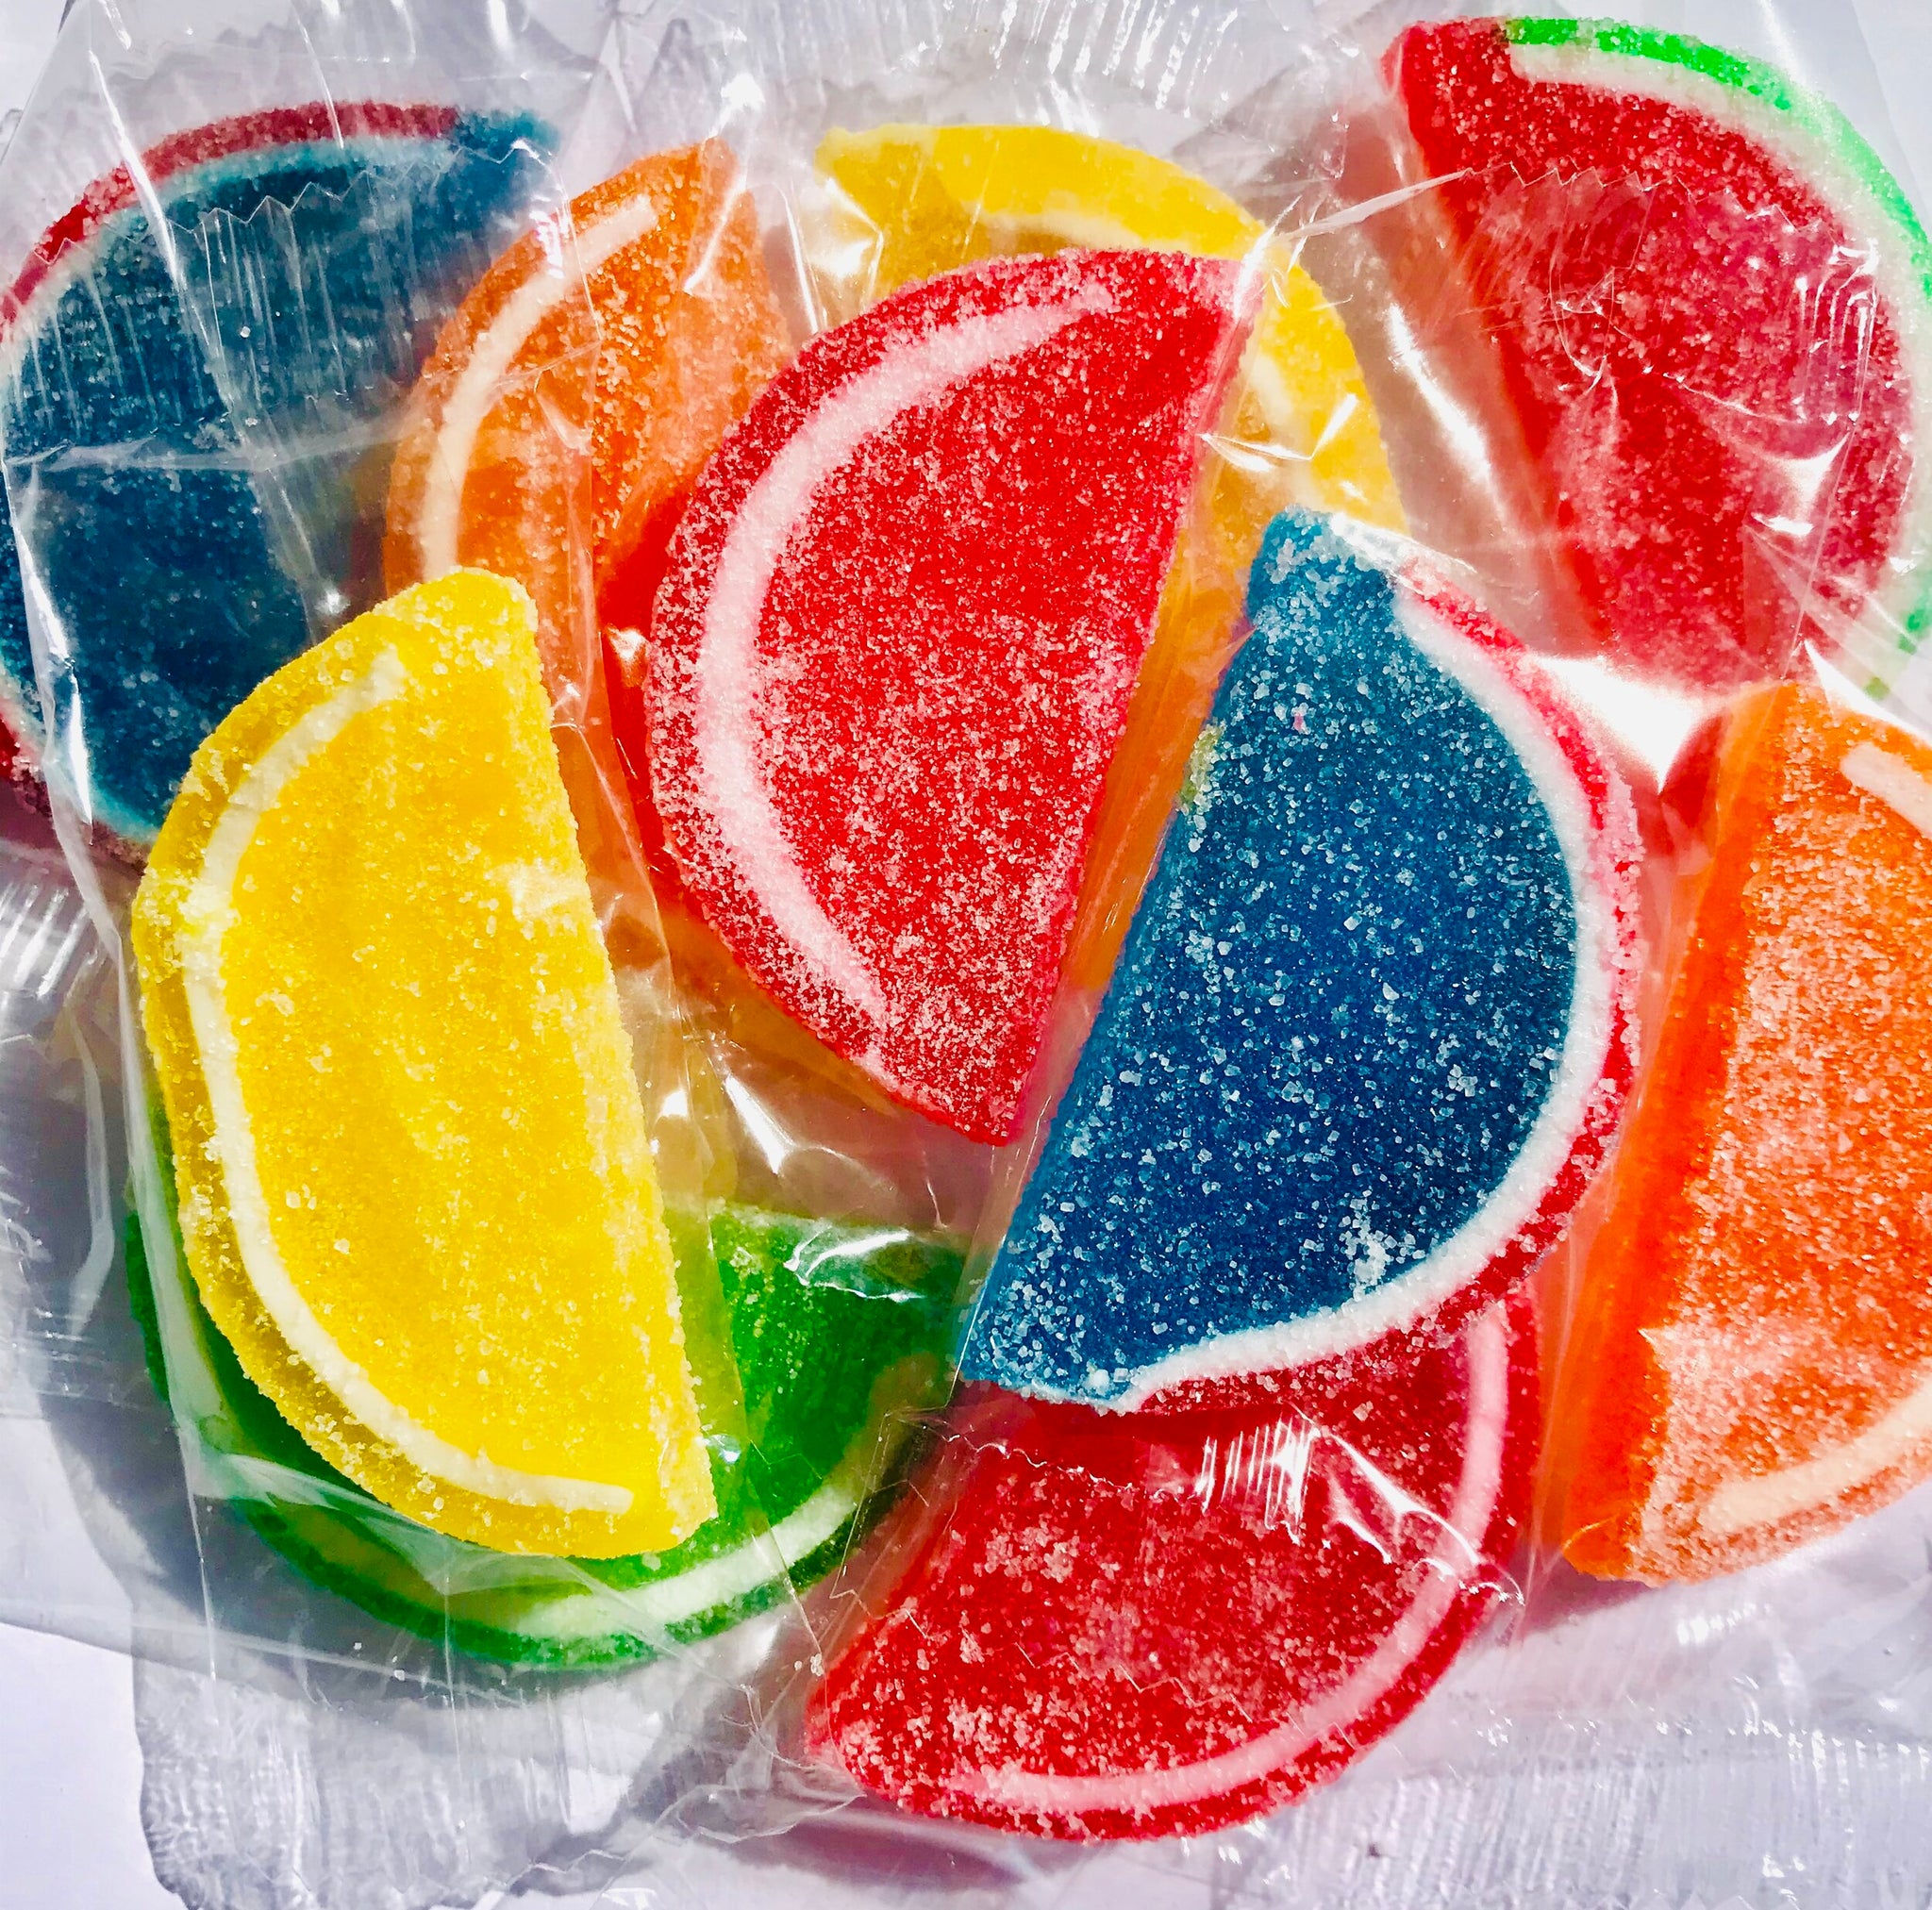 ASSORTED MIX - Individually Wrapped Fruit Slices - BULK